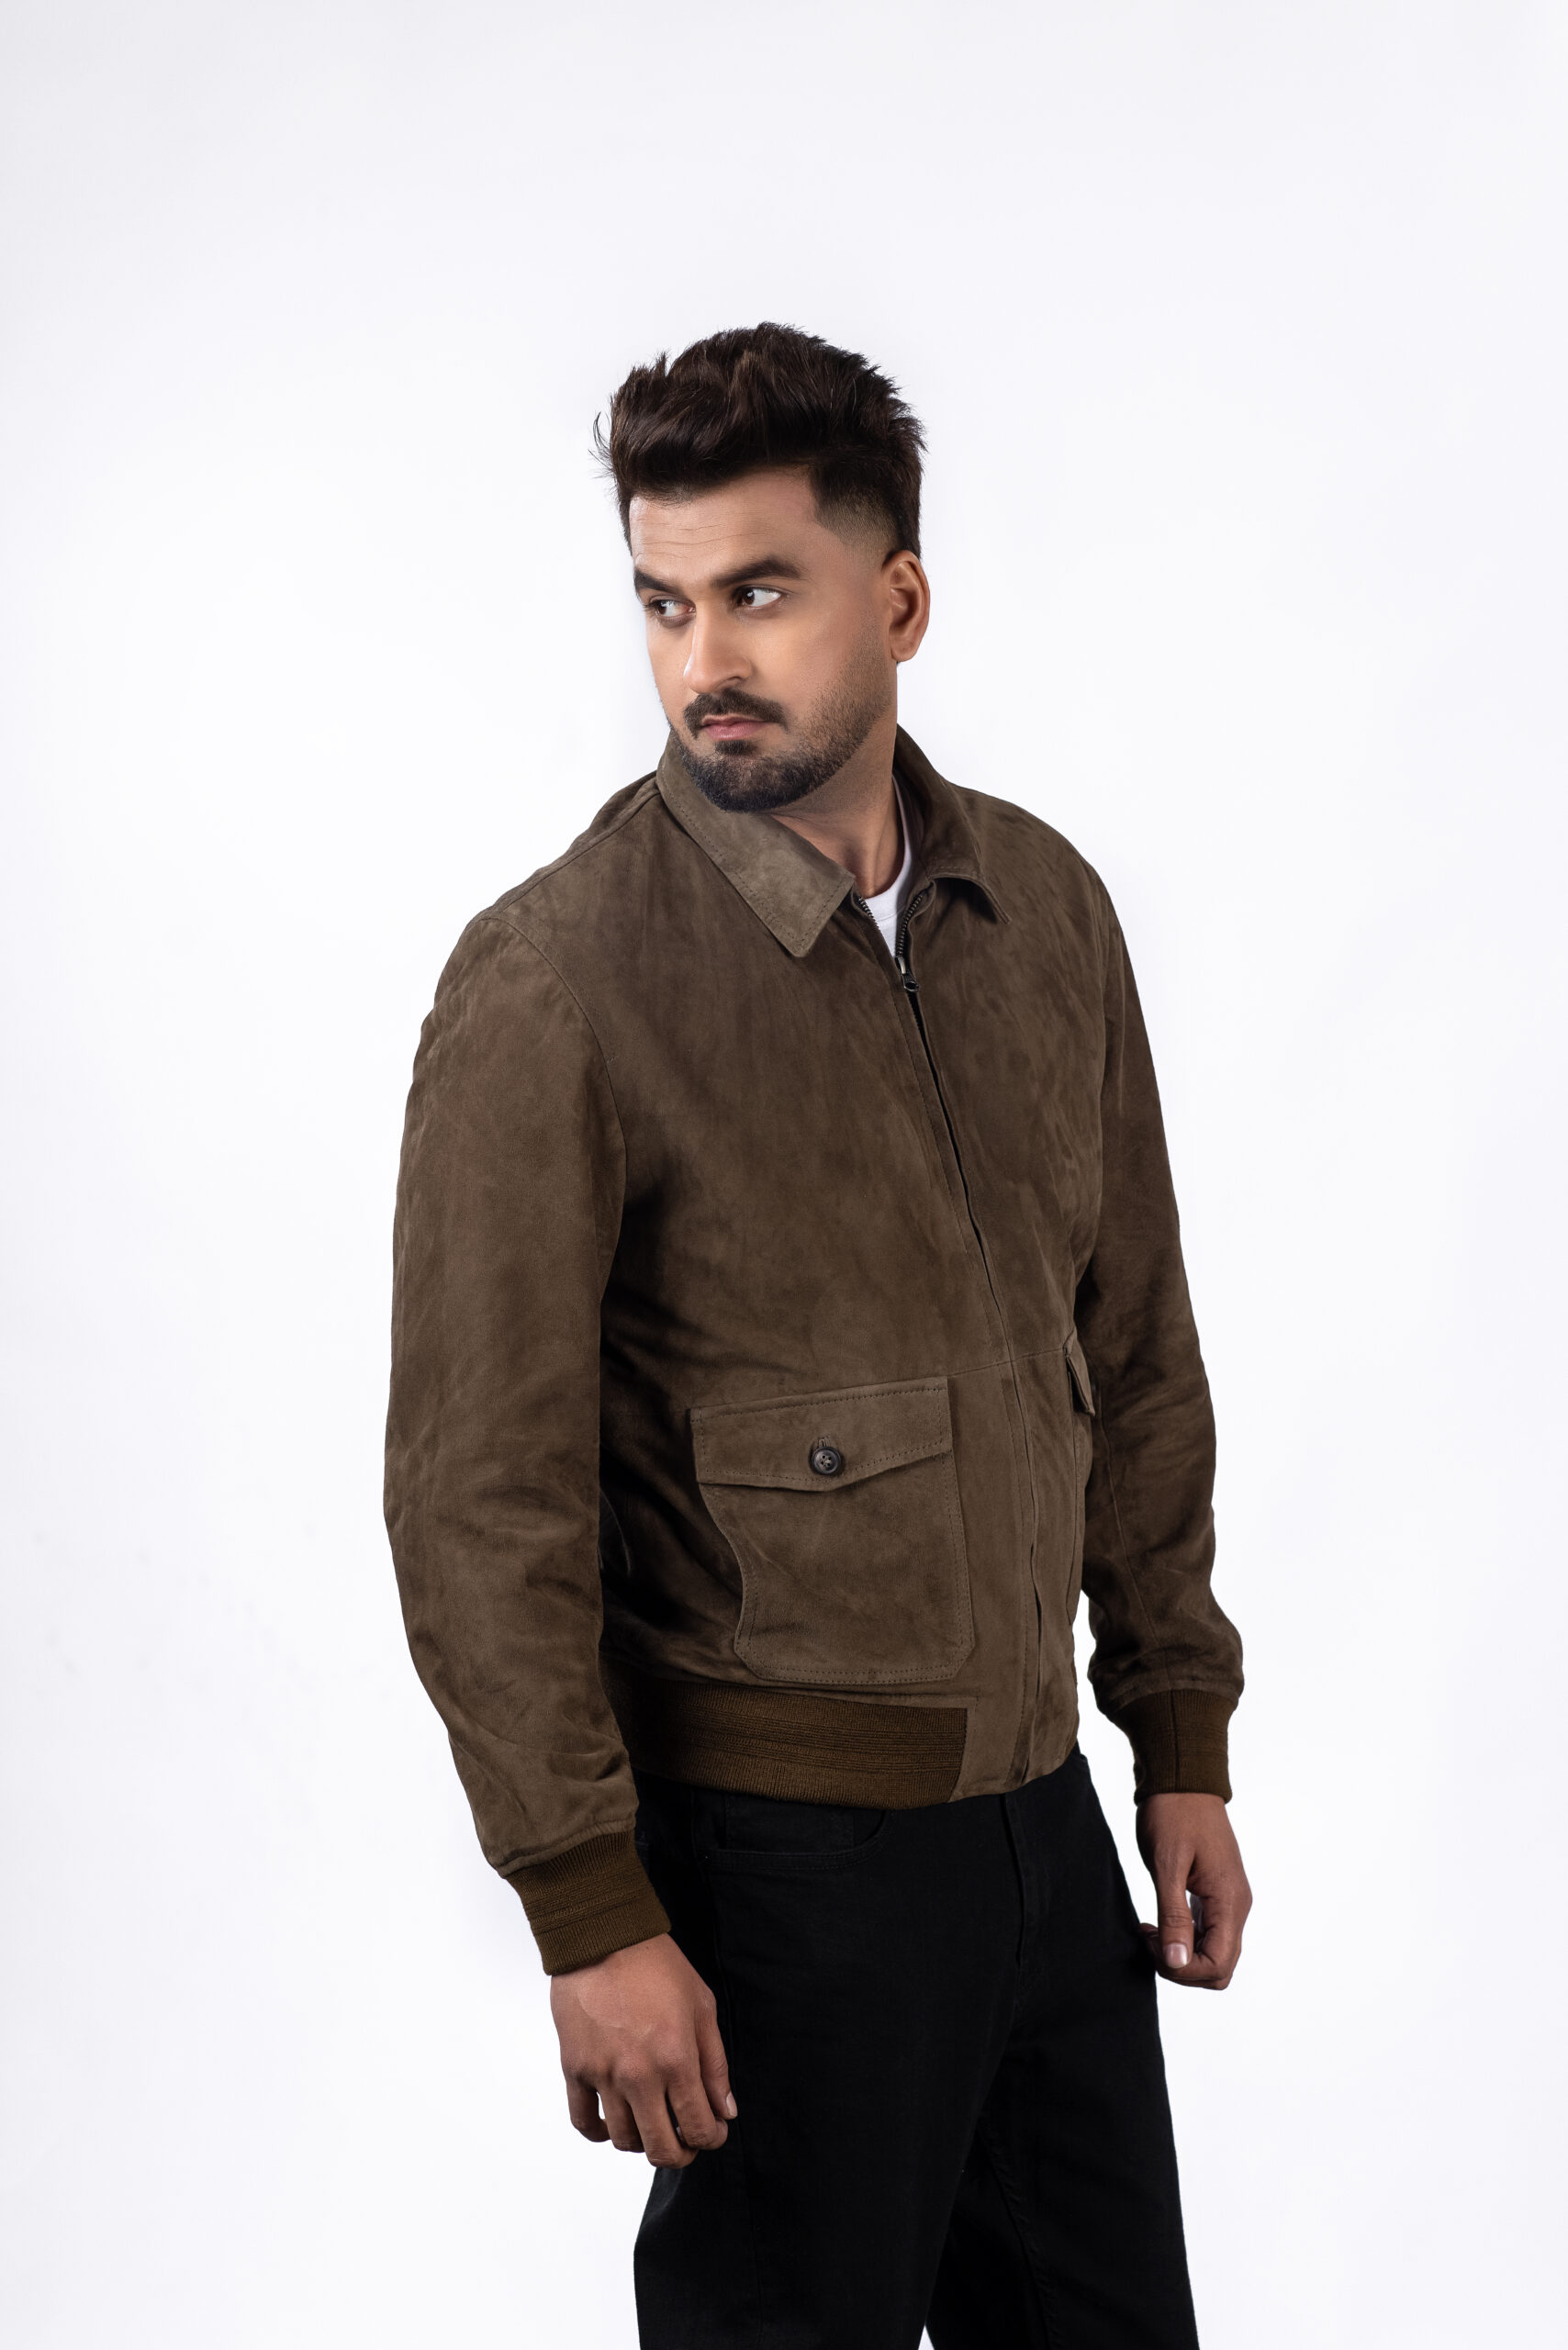 The Versatile Charm of Men's Olive Jackets: A Stylish Addition to Every Wardrobe